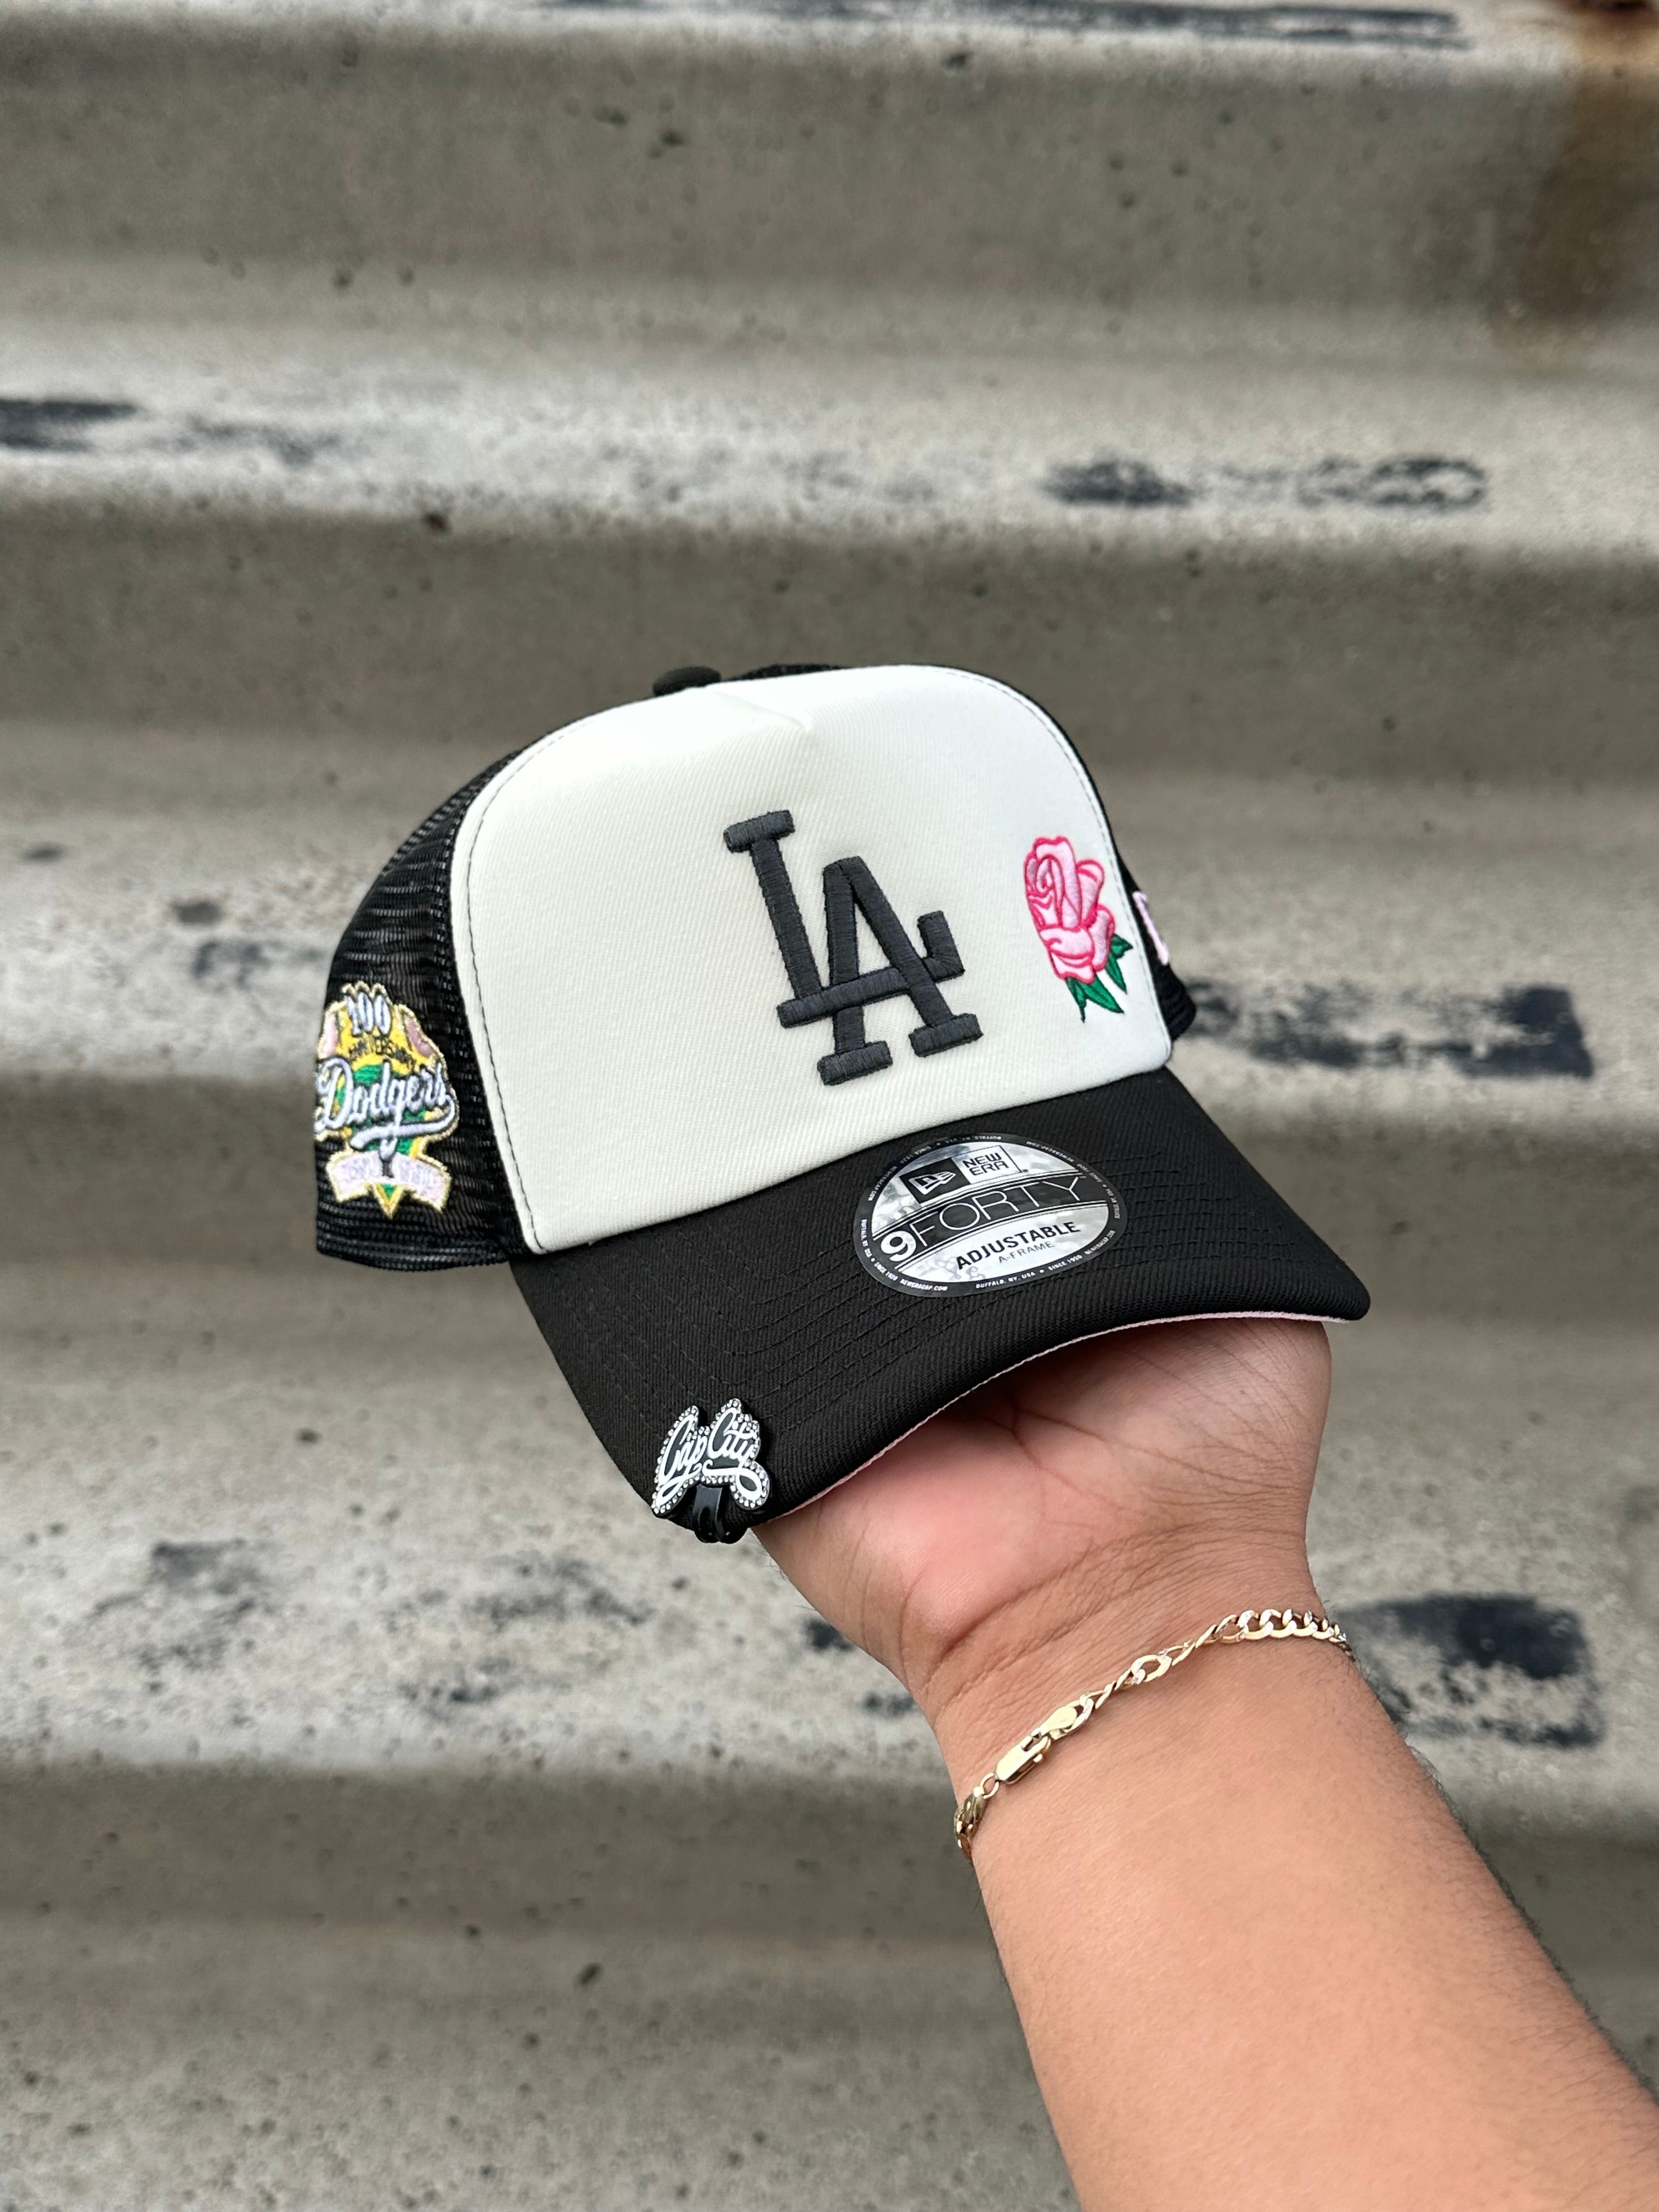 NEW ERA EXCLUSIVE 9FORTY A-FRAME WHITE/BLACK LOS ANGELES DODGERS W/ PINK ROSE + 100TH ANNIVERSARY SIDE PATCH